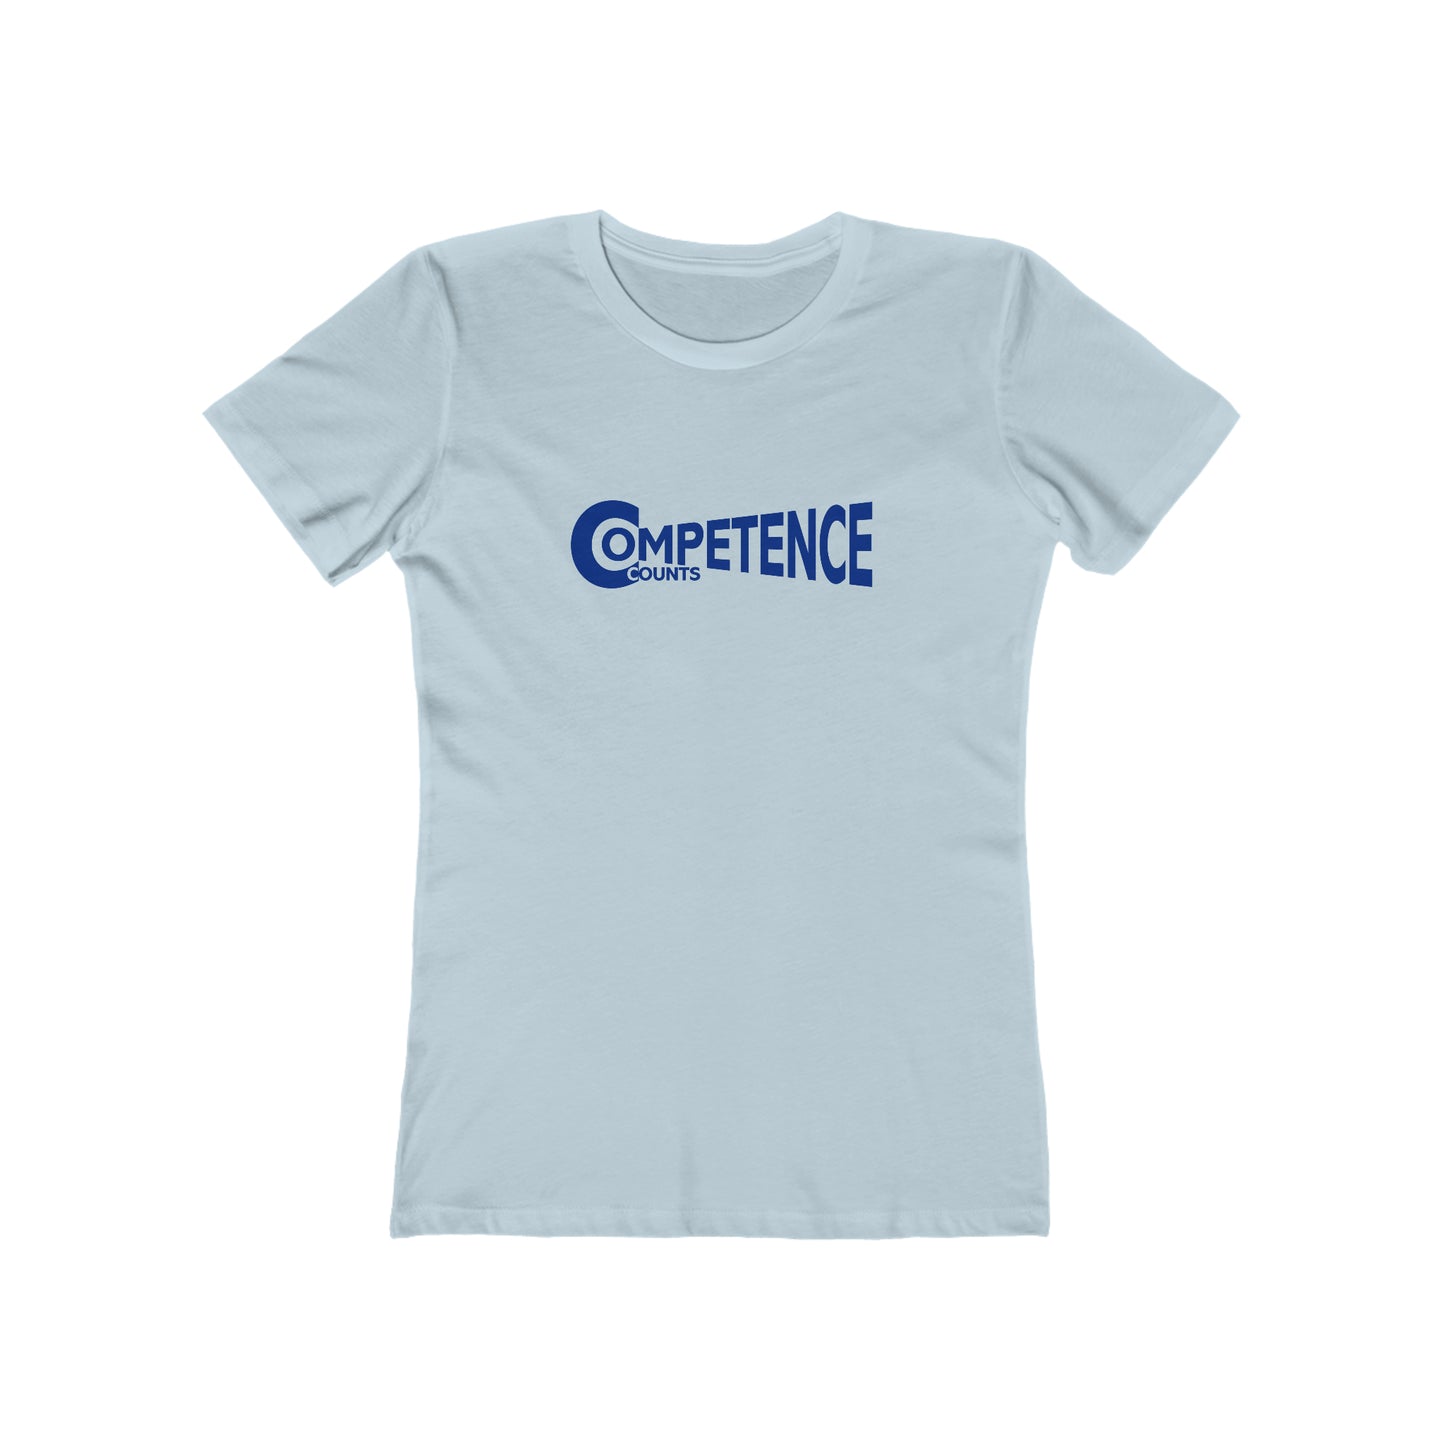 Competence Counts - Women's T-Shirt